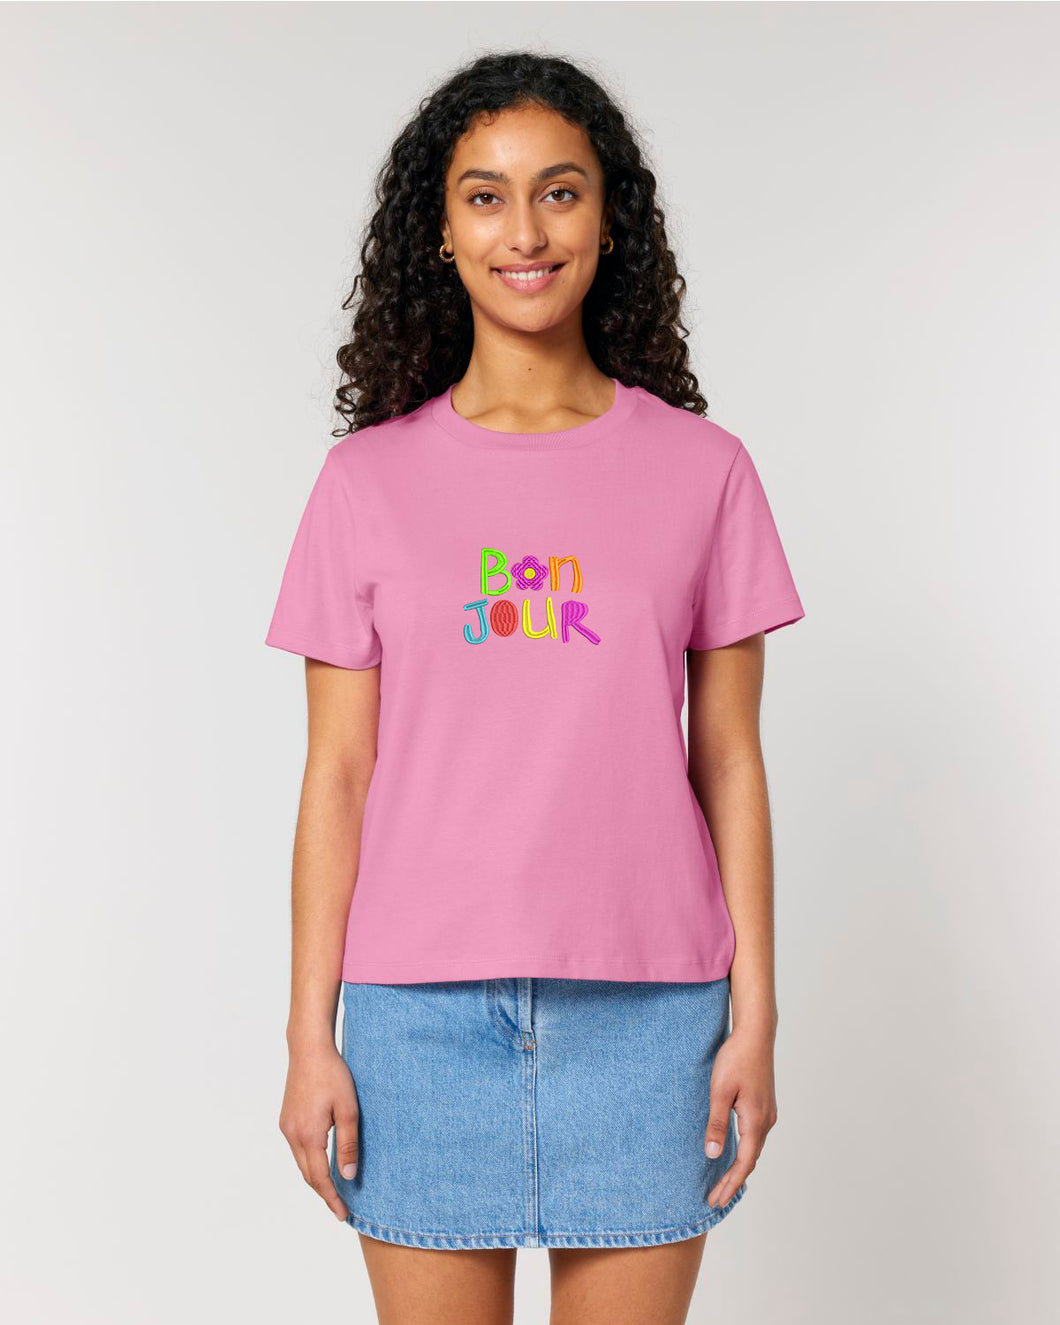 B🌸N JOUR - Embroidered WOMEN'S T-SHIRT